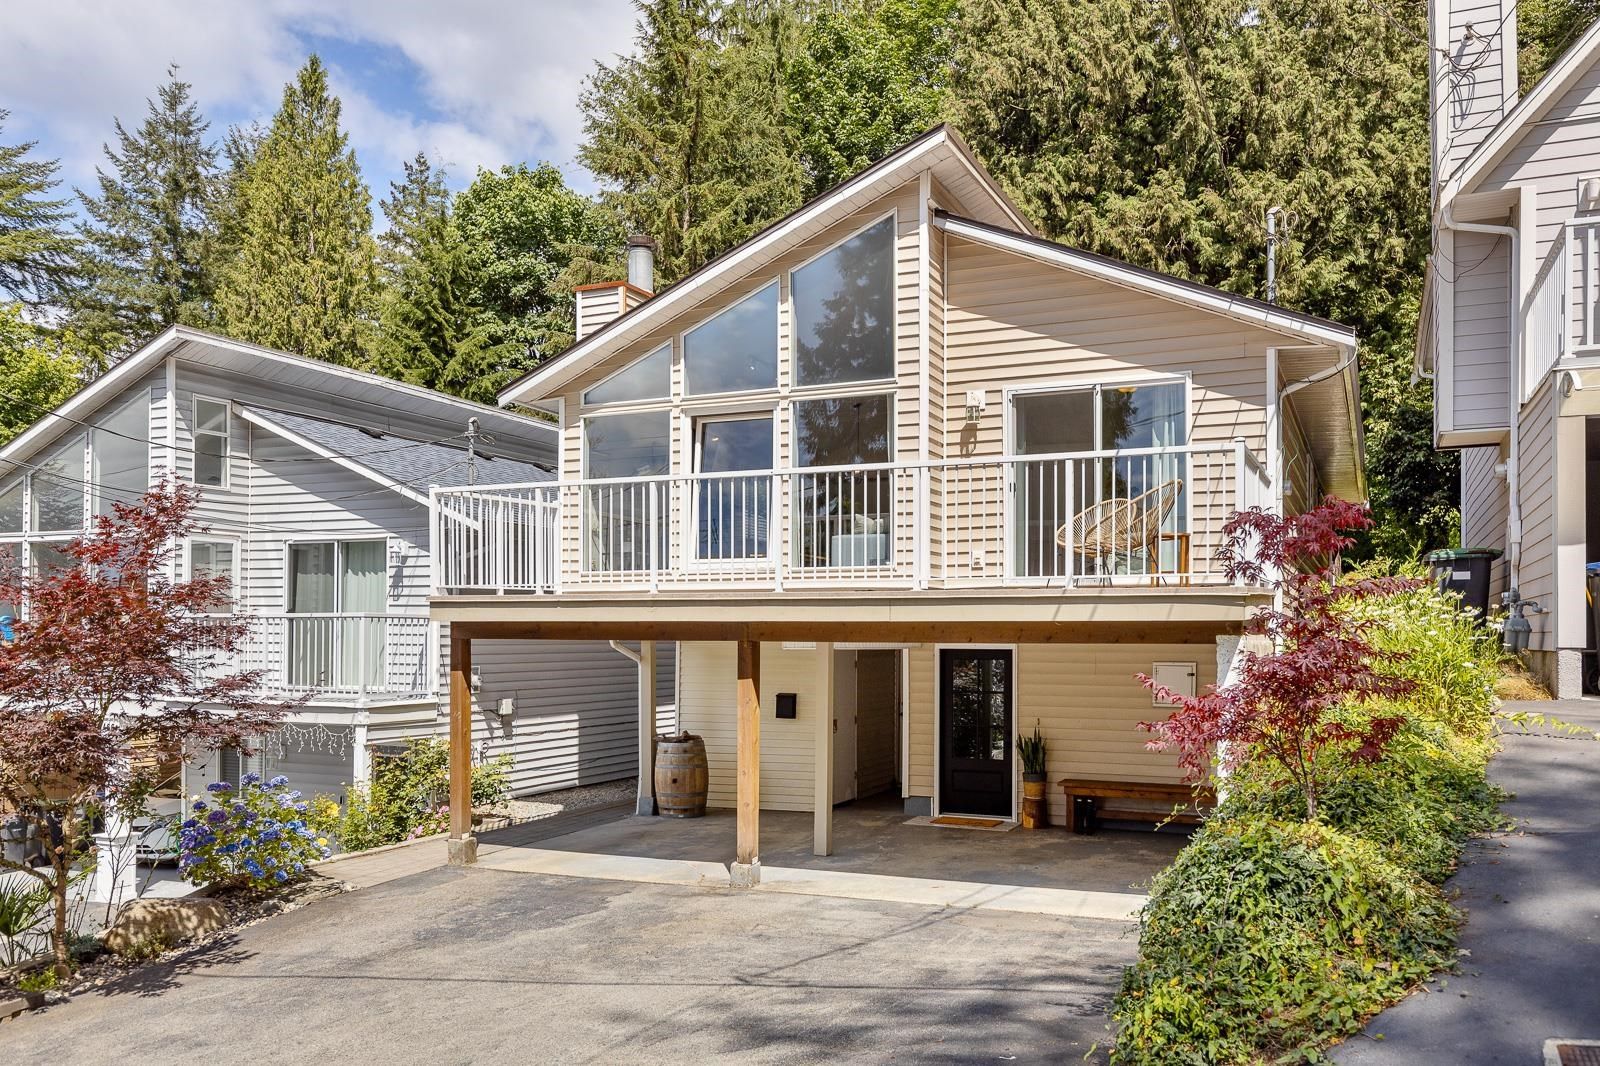 I have sold a property at 464 BEATRICE STREET LANE in Port Moody
